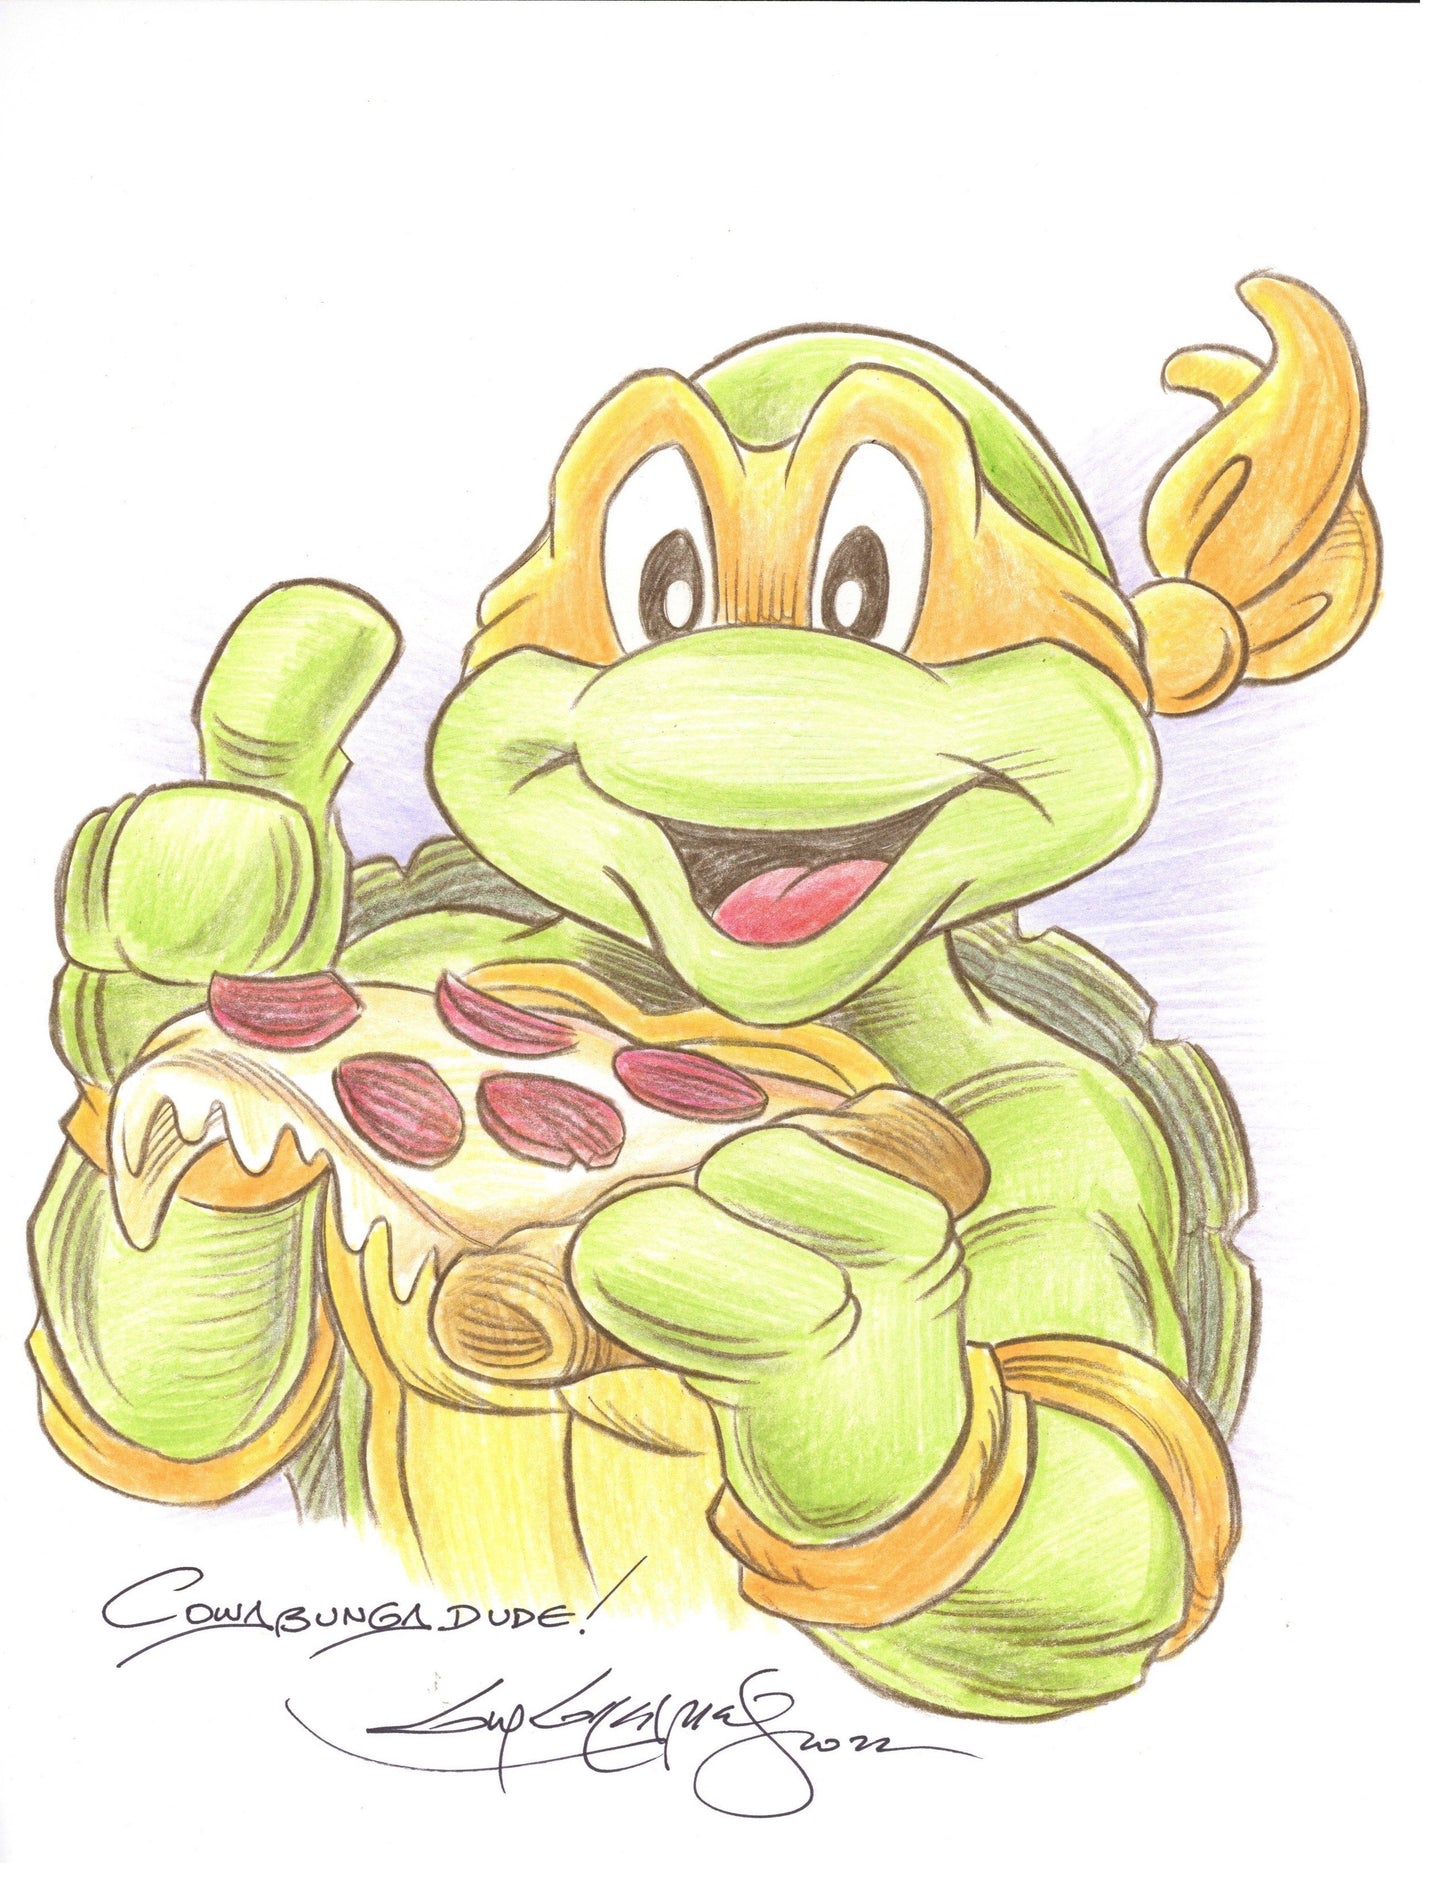 TMNT Michelangelo with Pizza Original Art 8.5x11 Sketch - Created by Guy Gilchrist